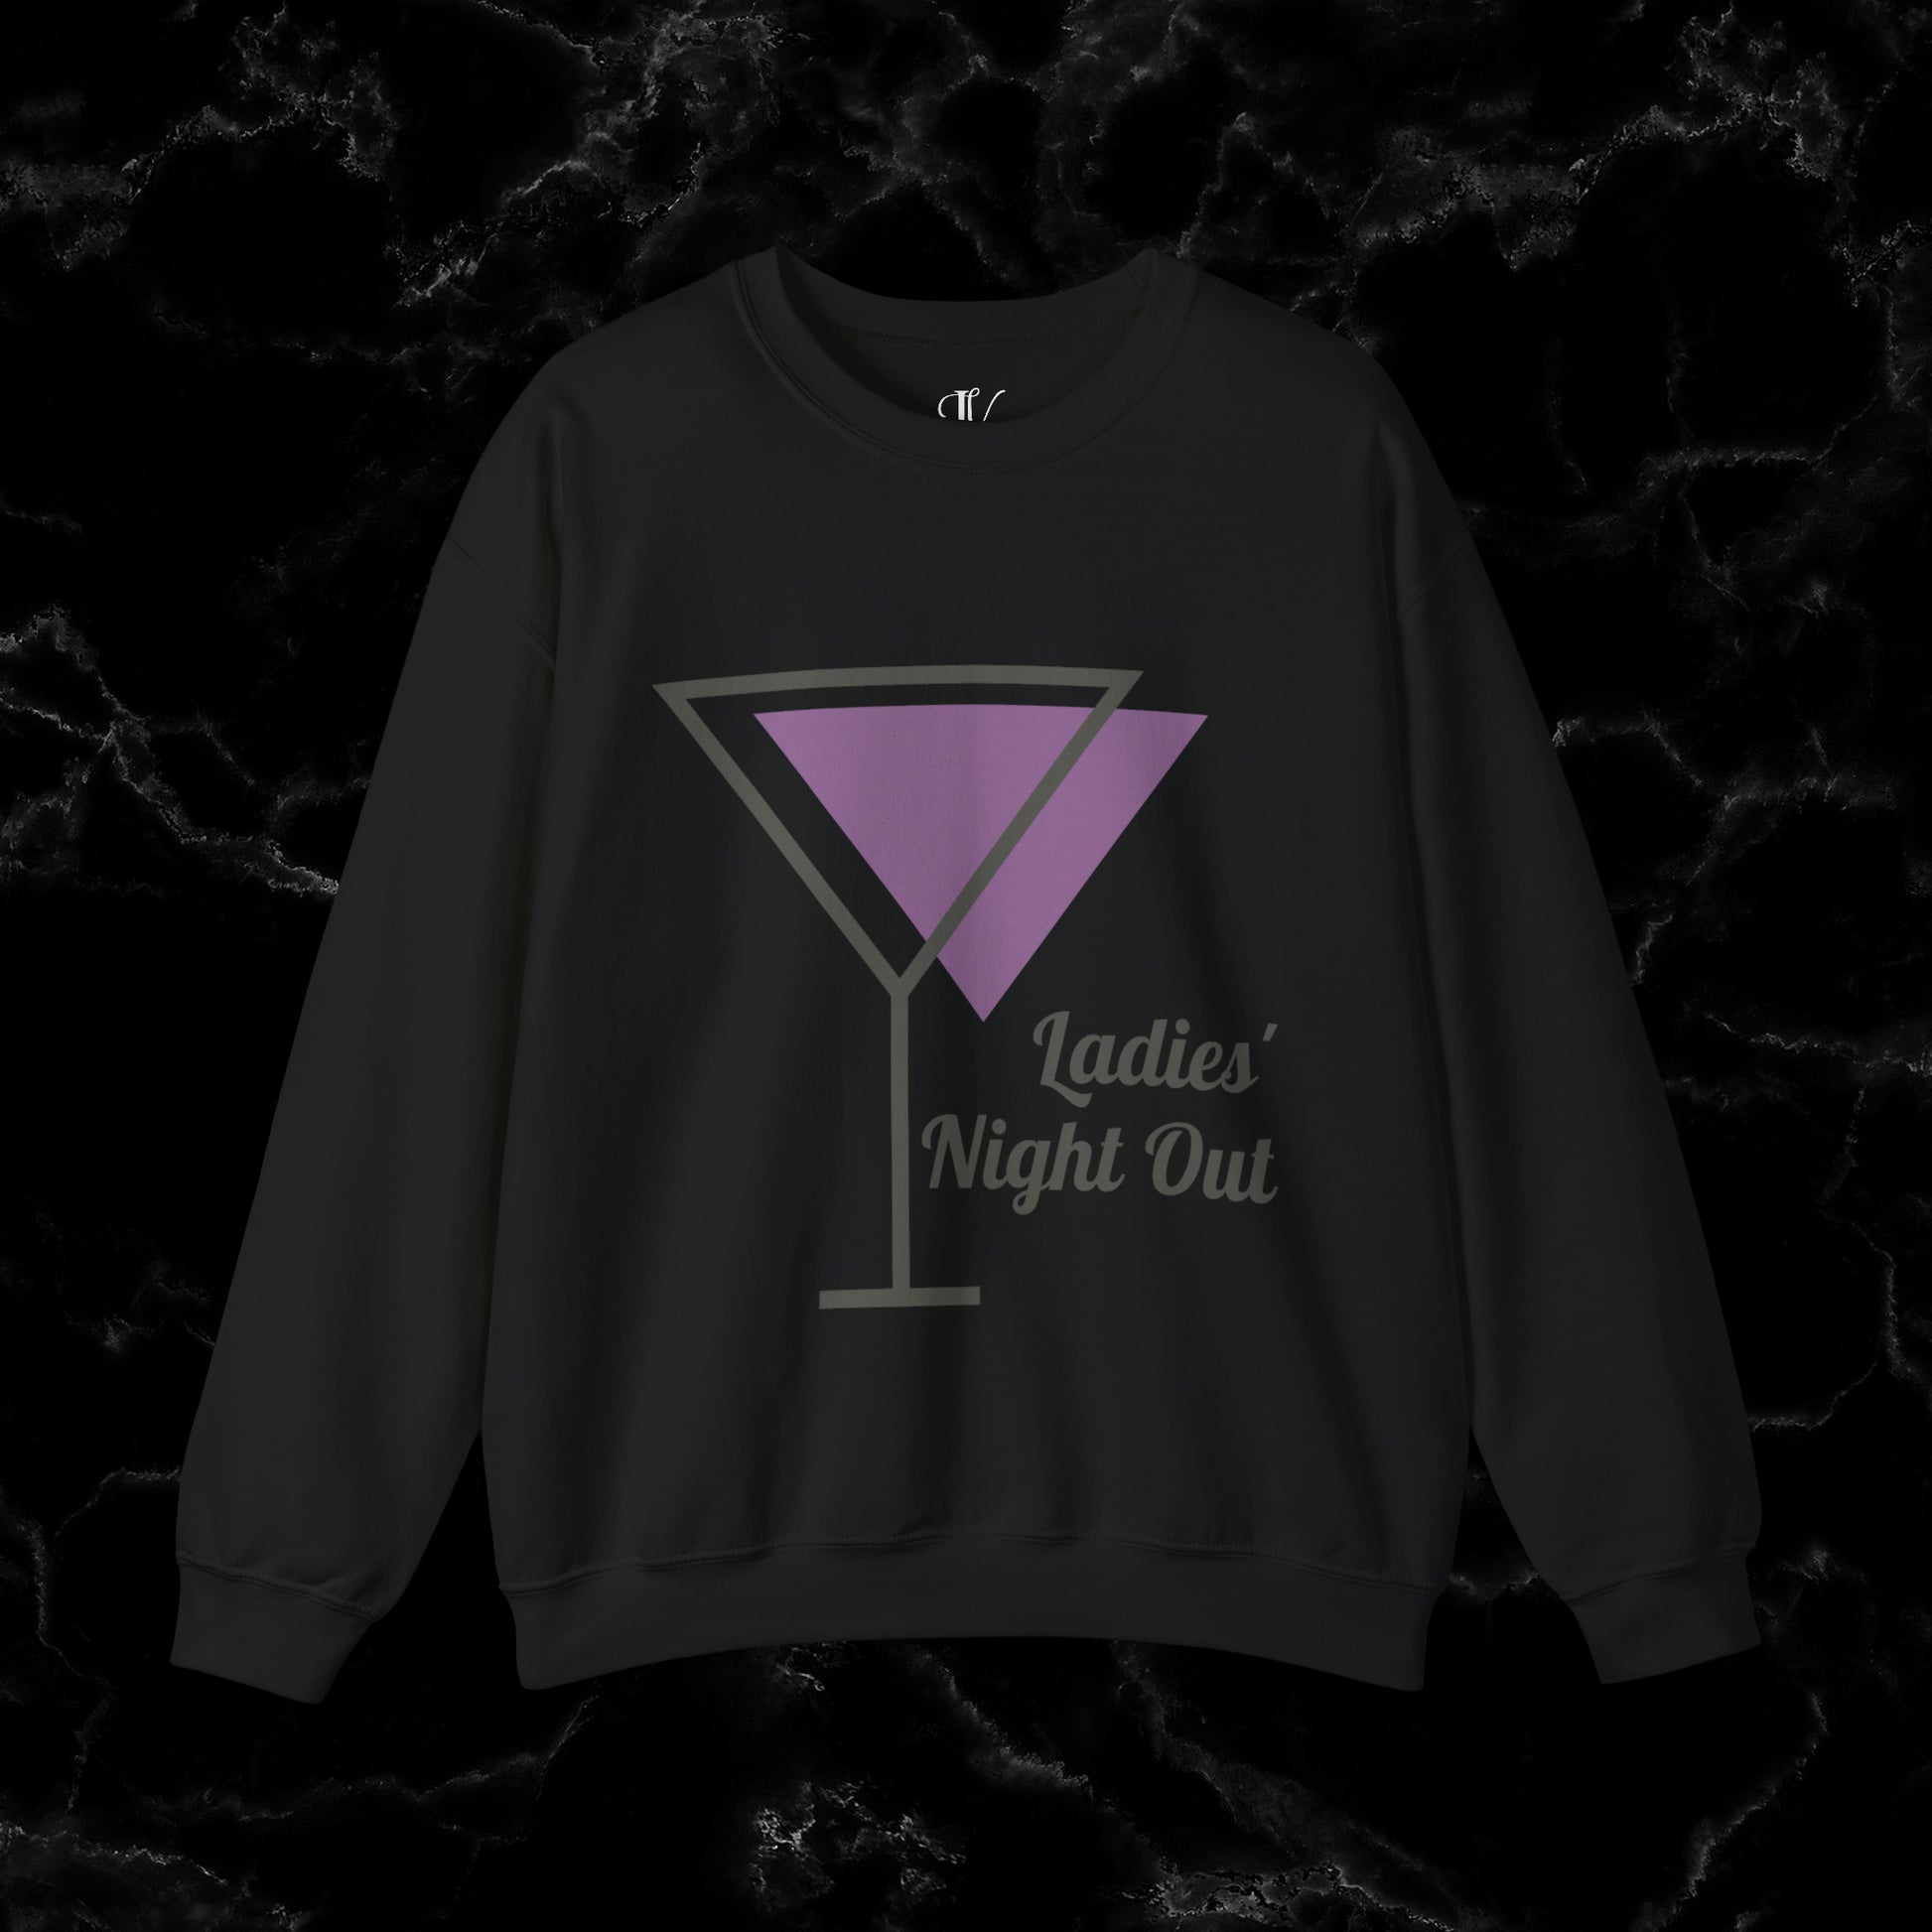 Ladies' Night Out - Dirty Martini Social Club Sweatshirt - Elevate Your Night Out with Style and Sass in this Chic and Comfortable Sweatshirt! Sweatshirt S Black 